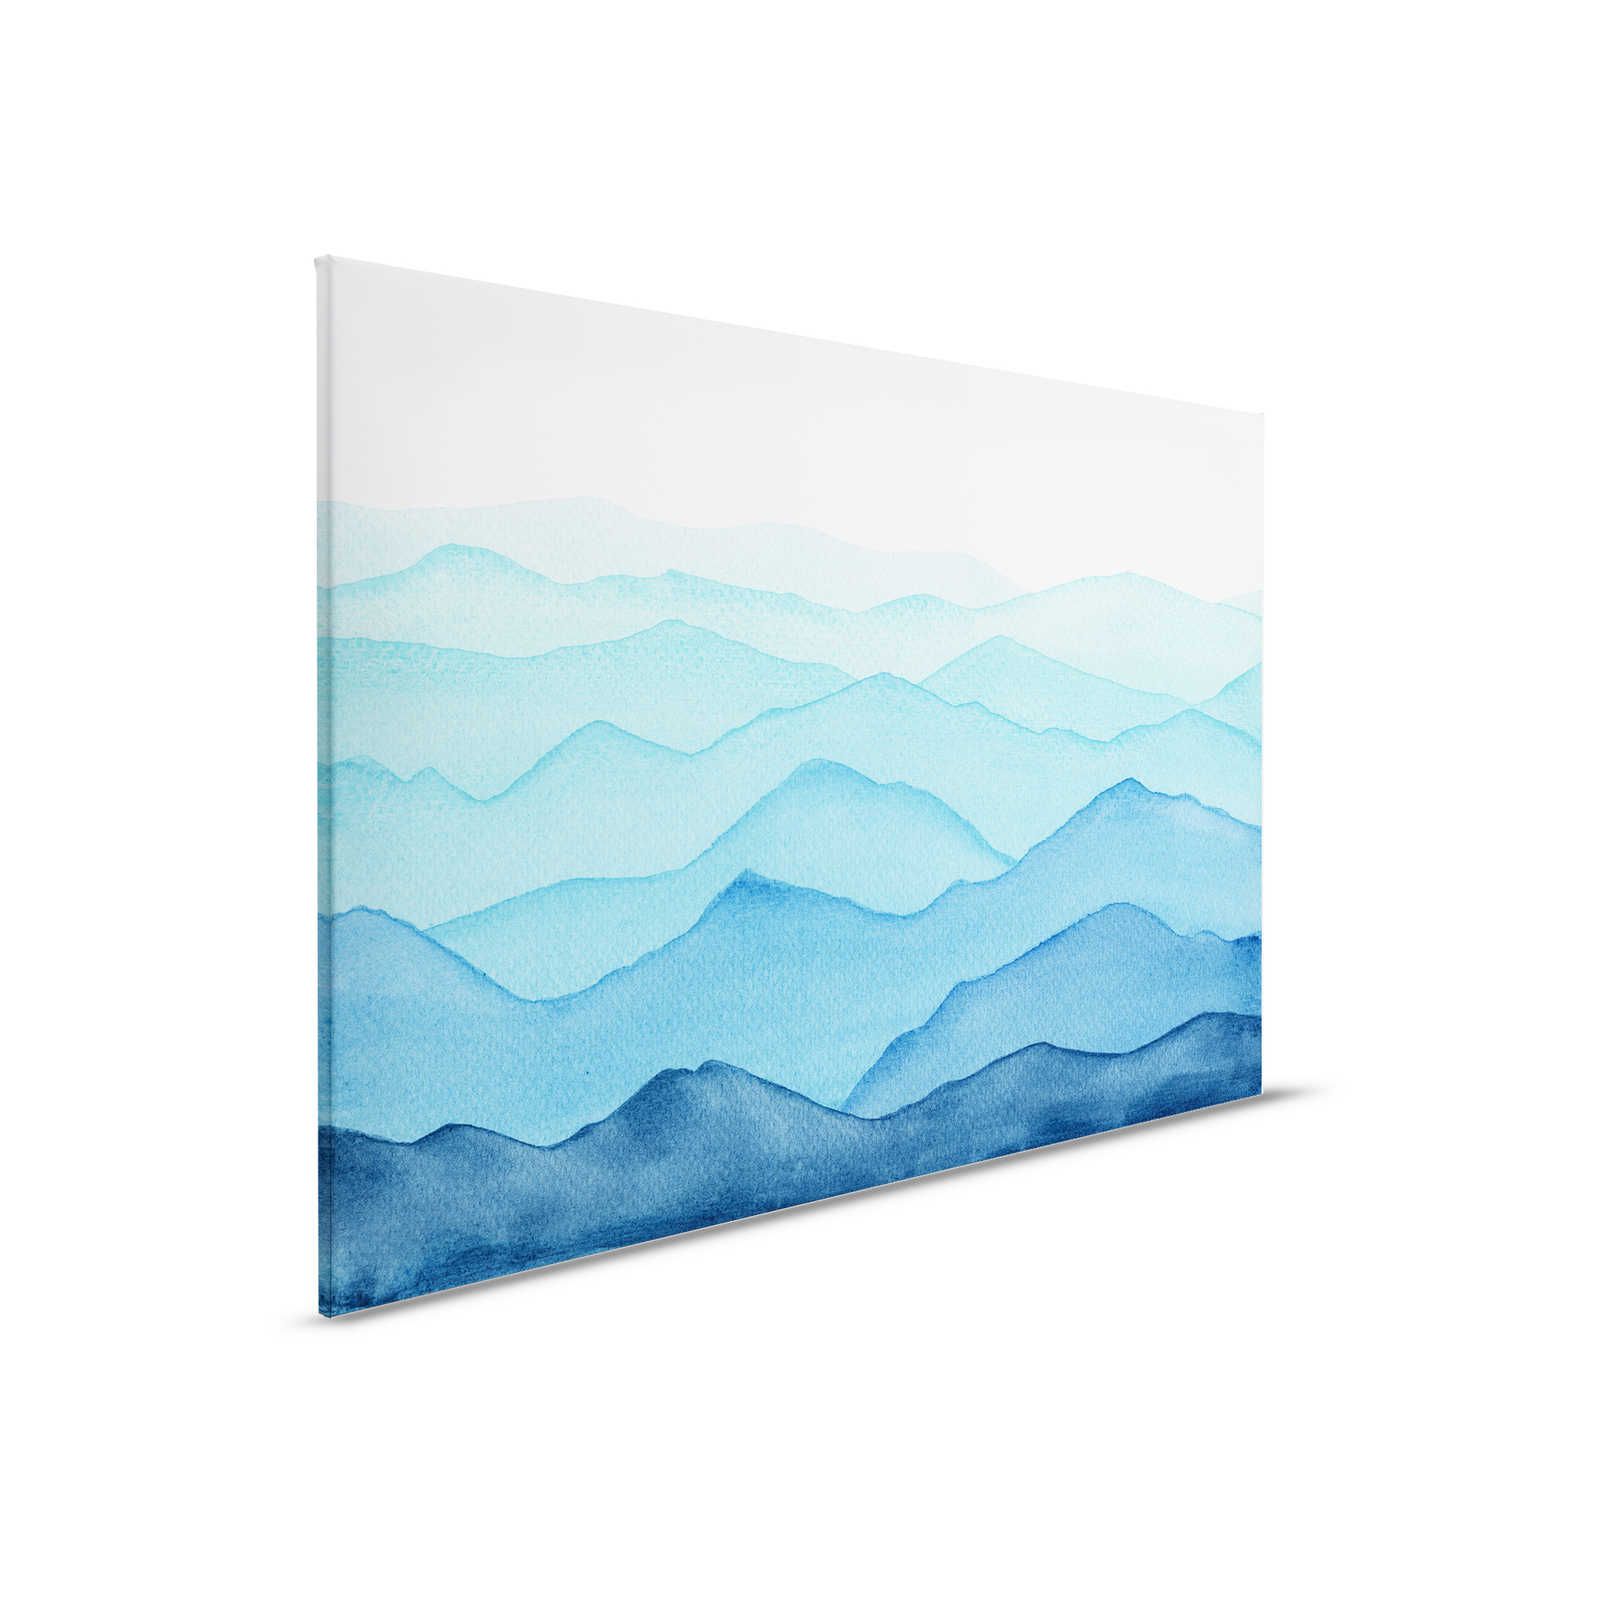 Canvas Sea with waves in watercolour - 90 cm x 60 cm
